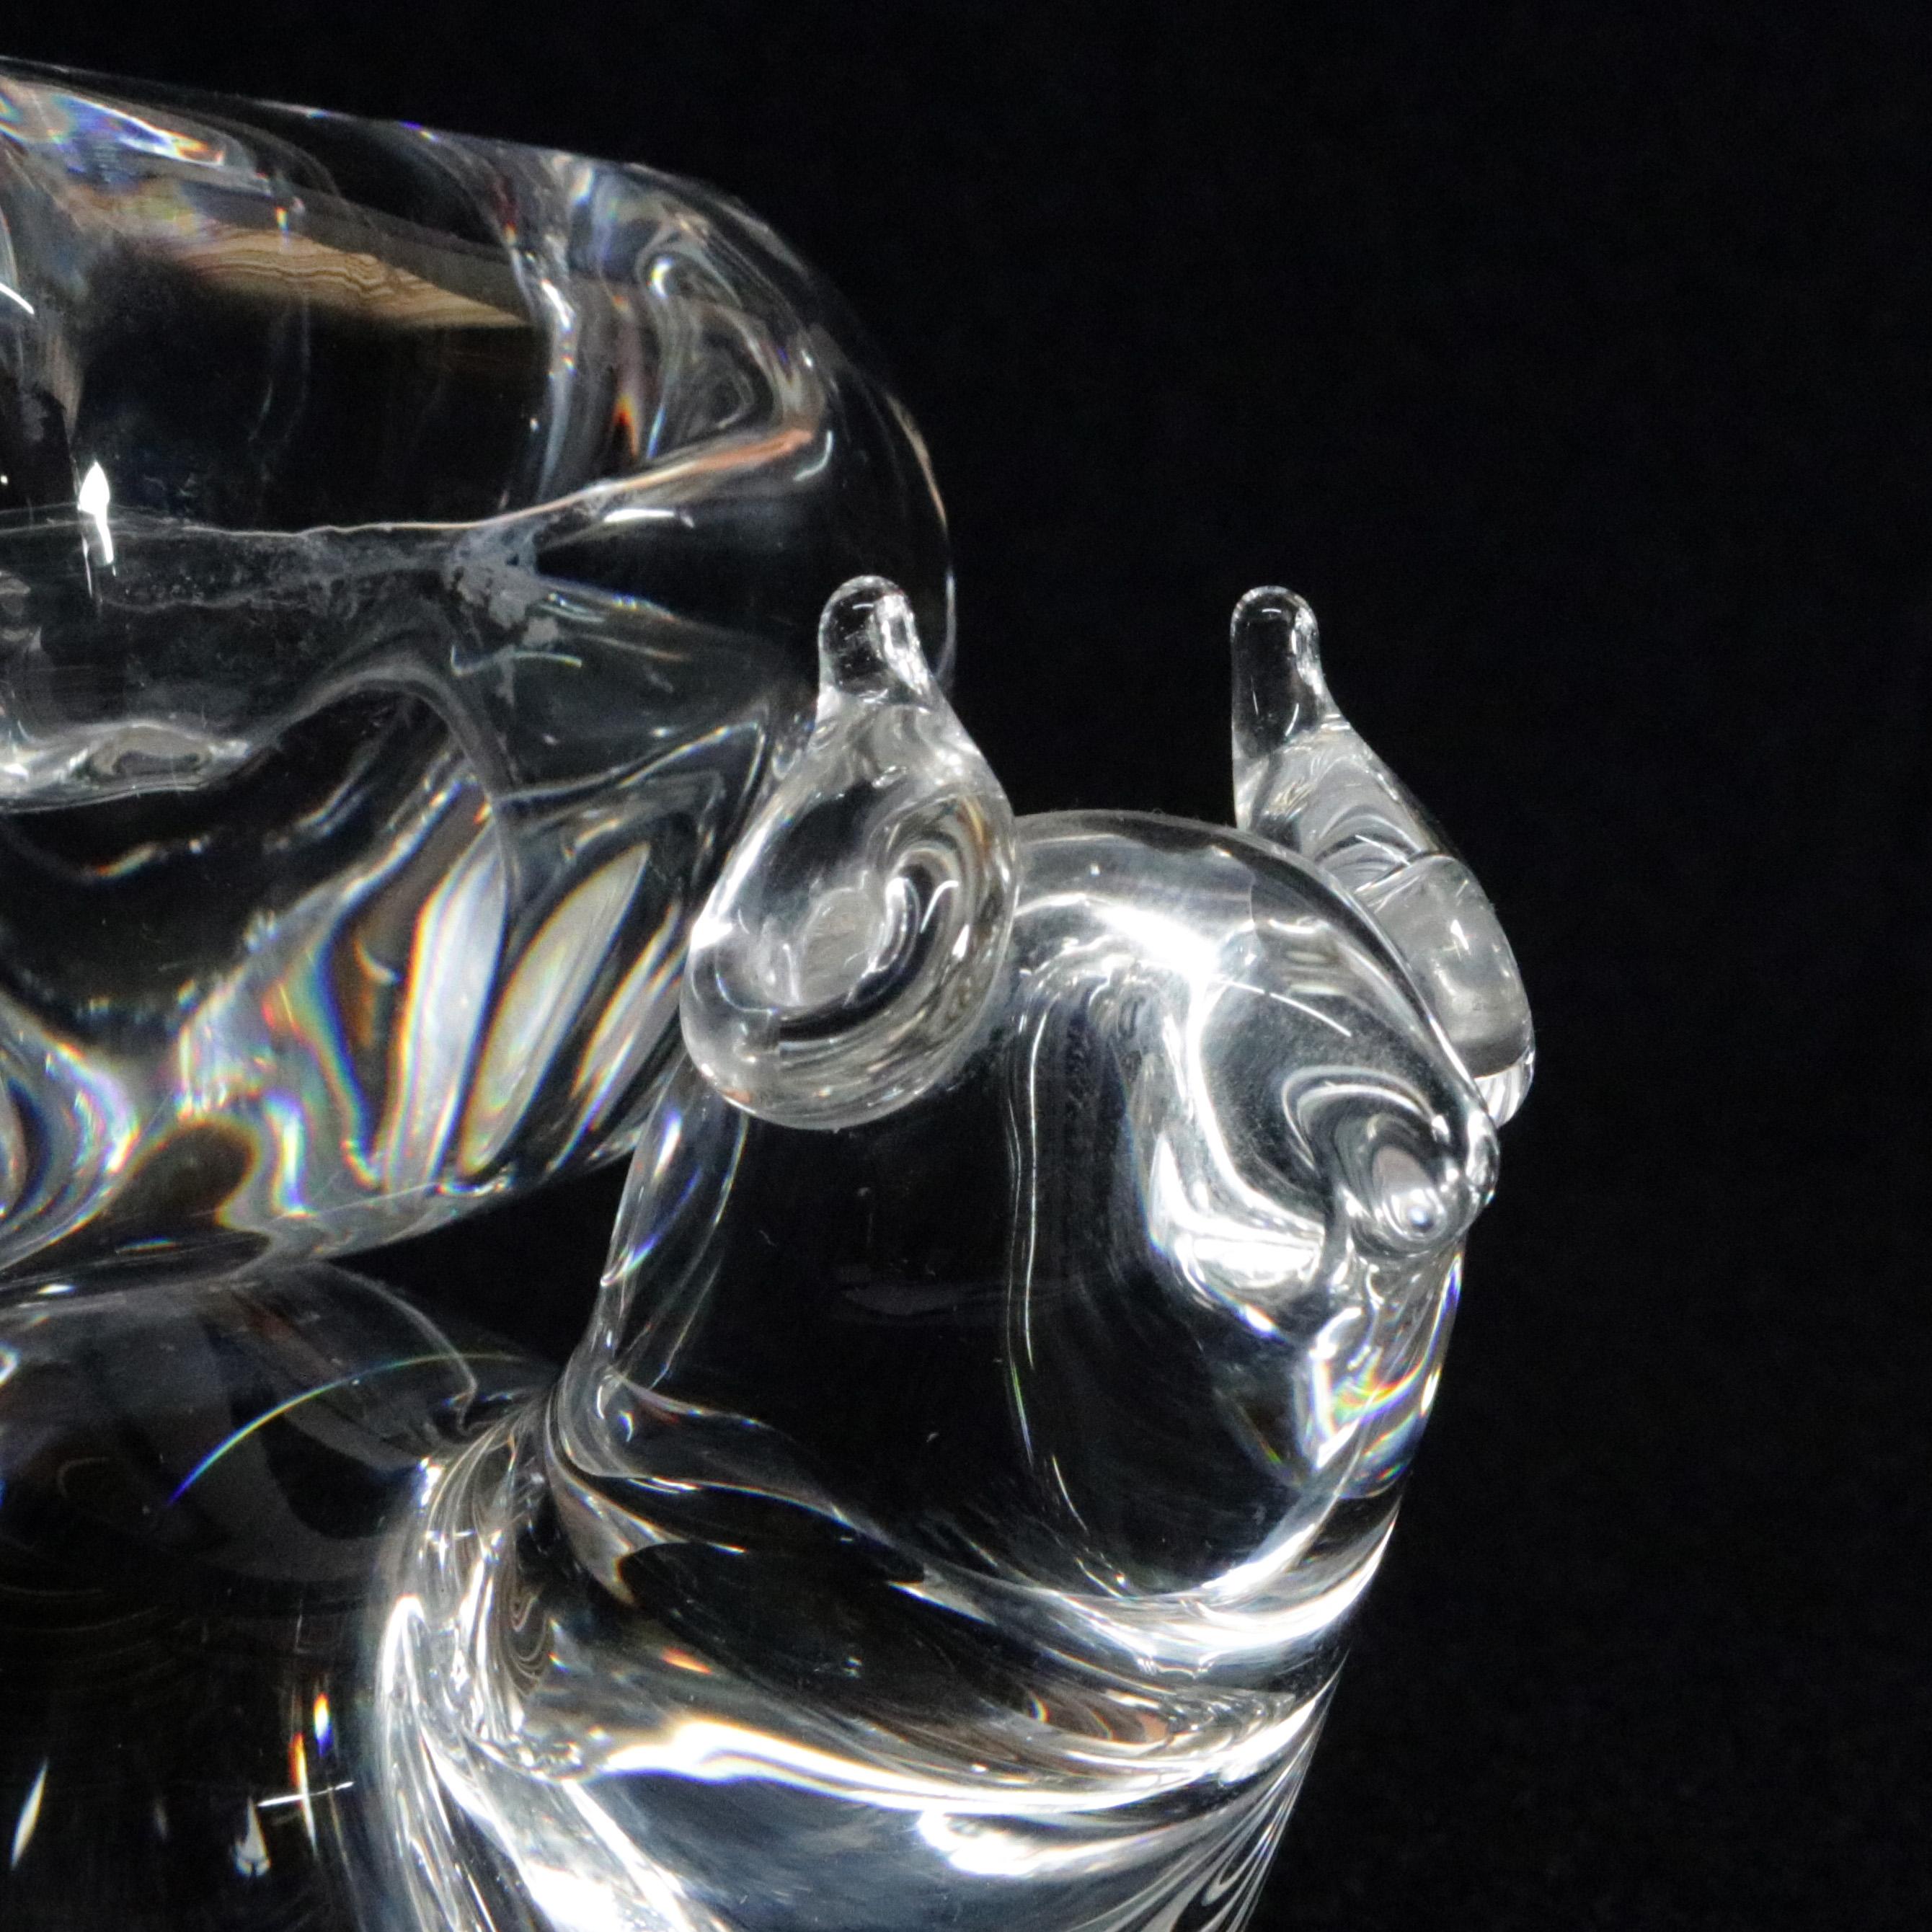 American Steuben Crystal Sculpture Paperweight of Squirrel by Lloyd Atkins, Signed